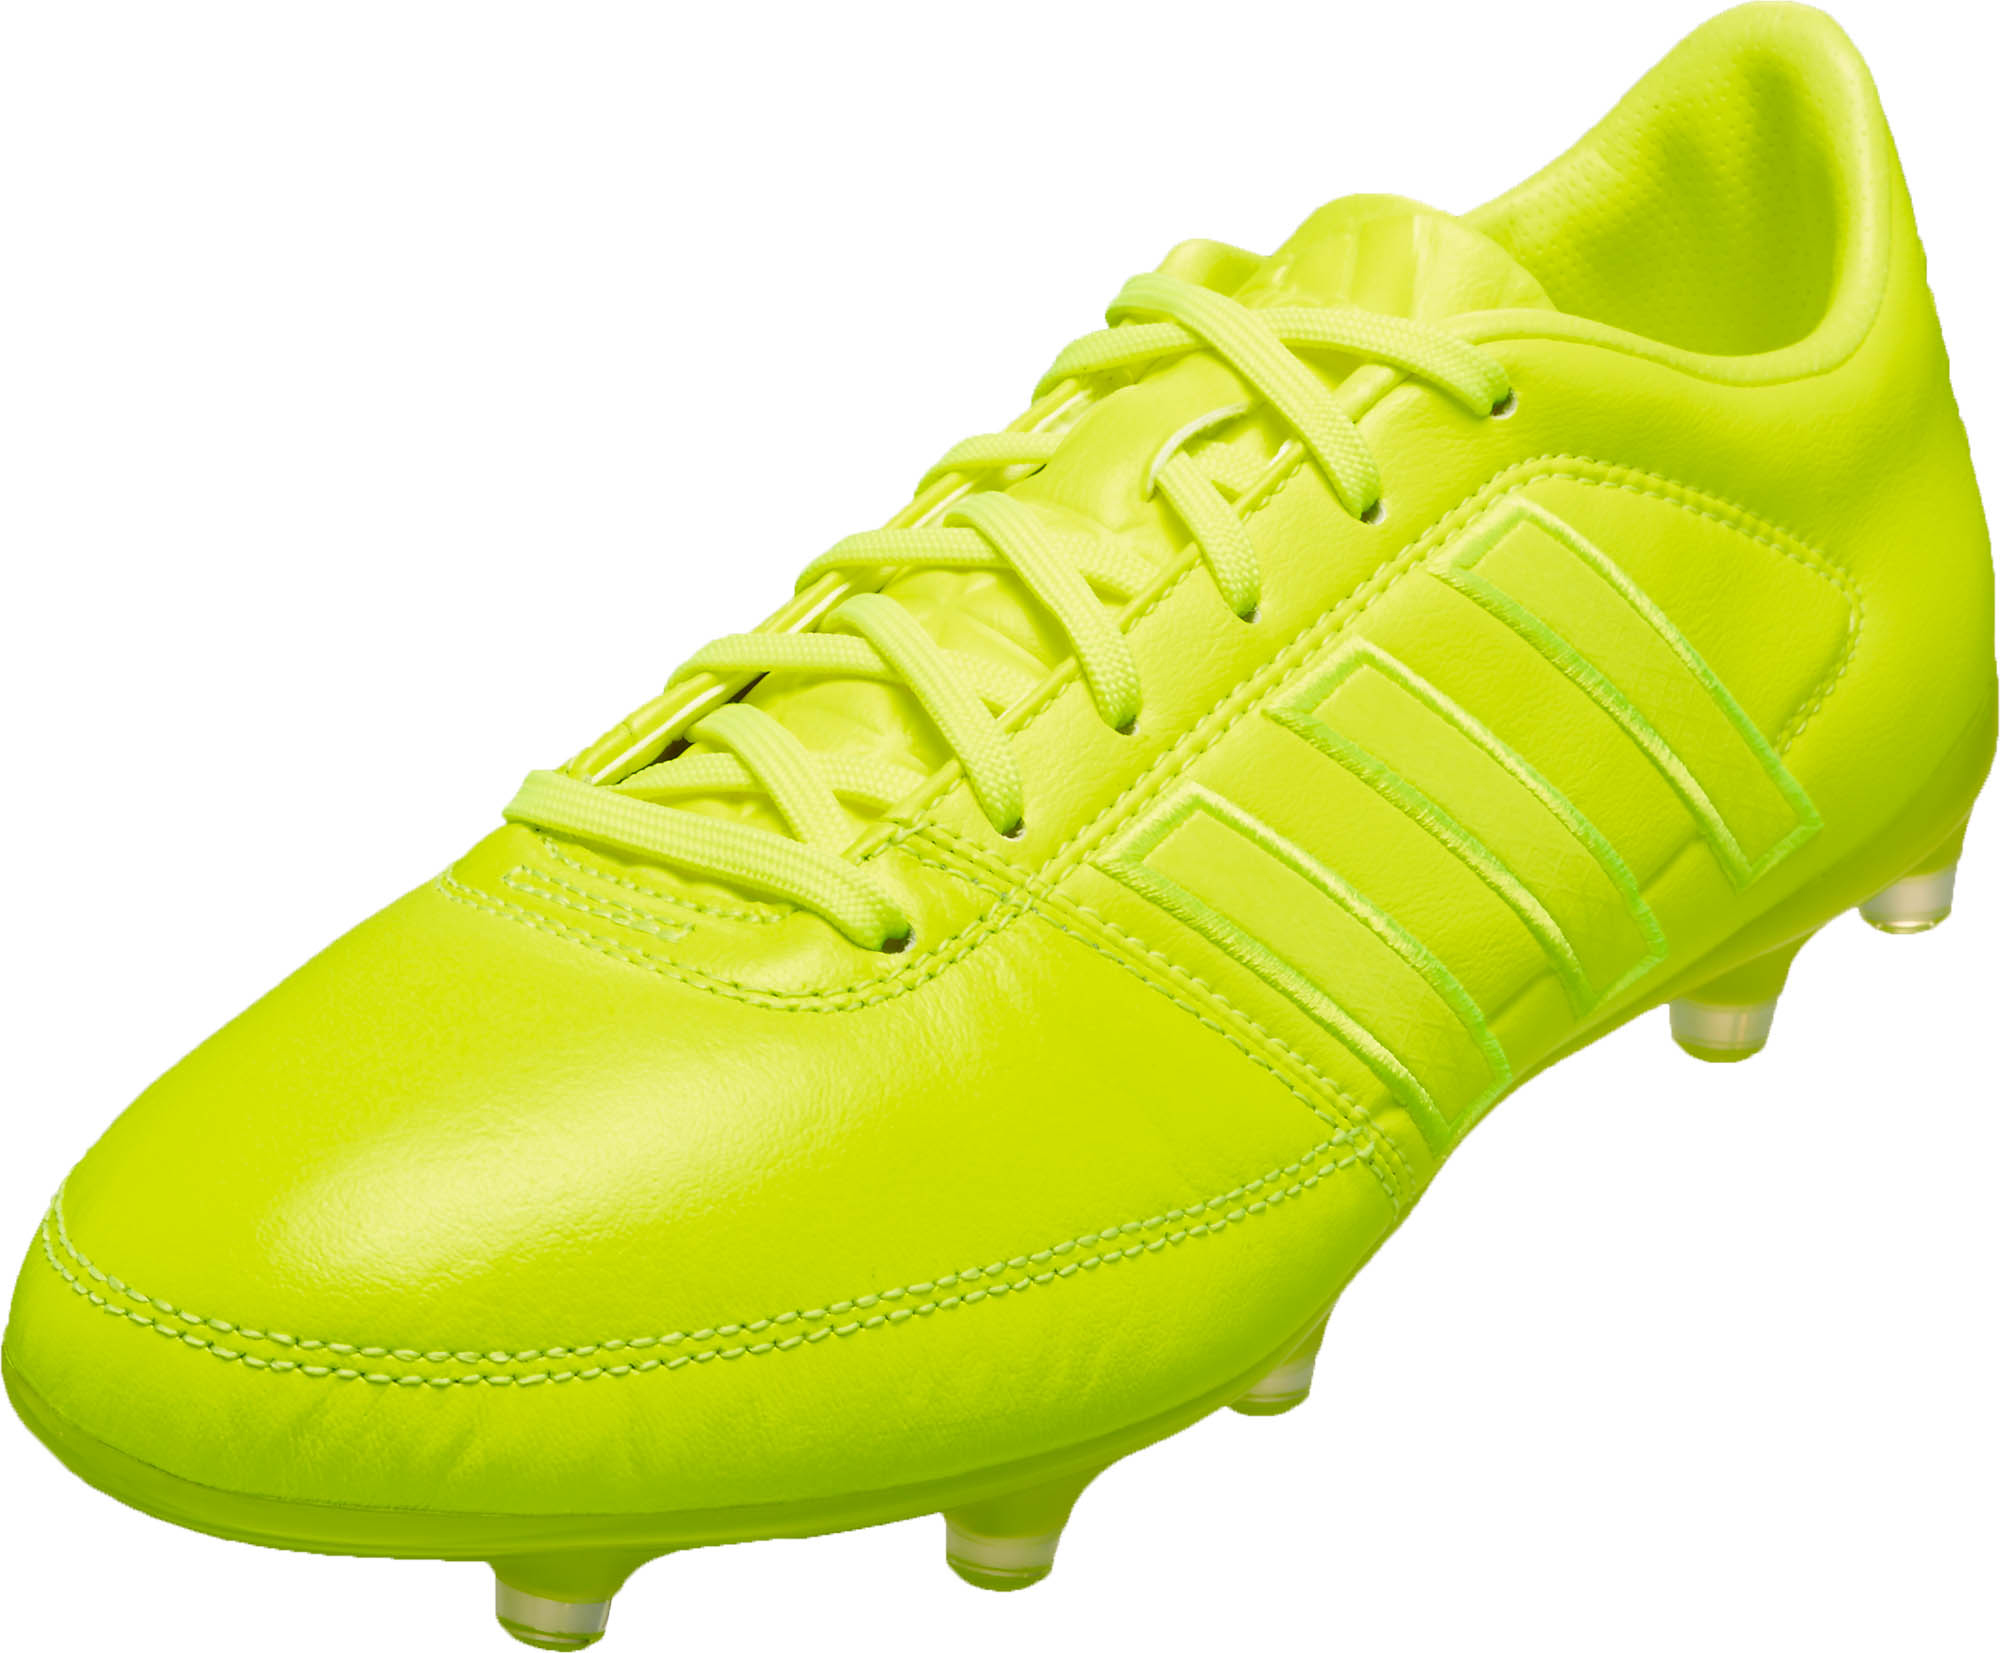 yellow adidas soccer cleats